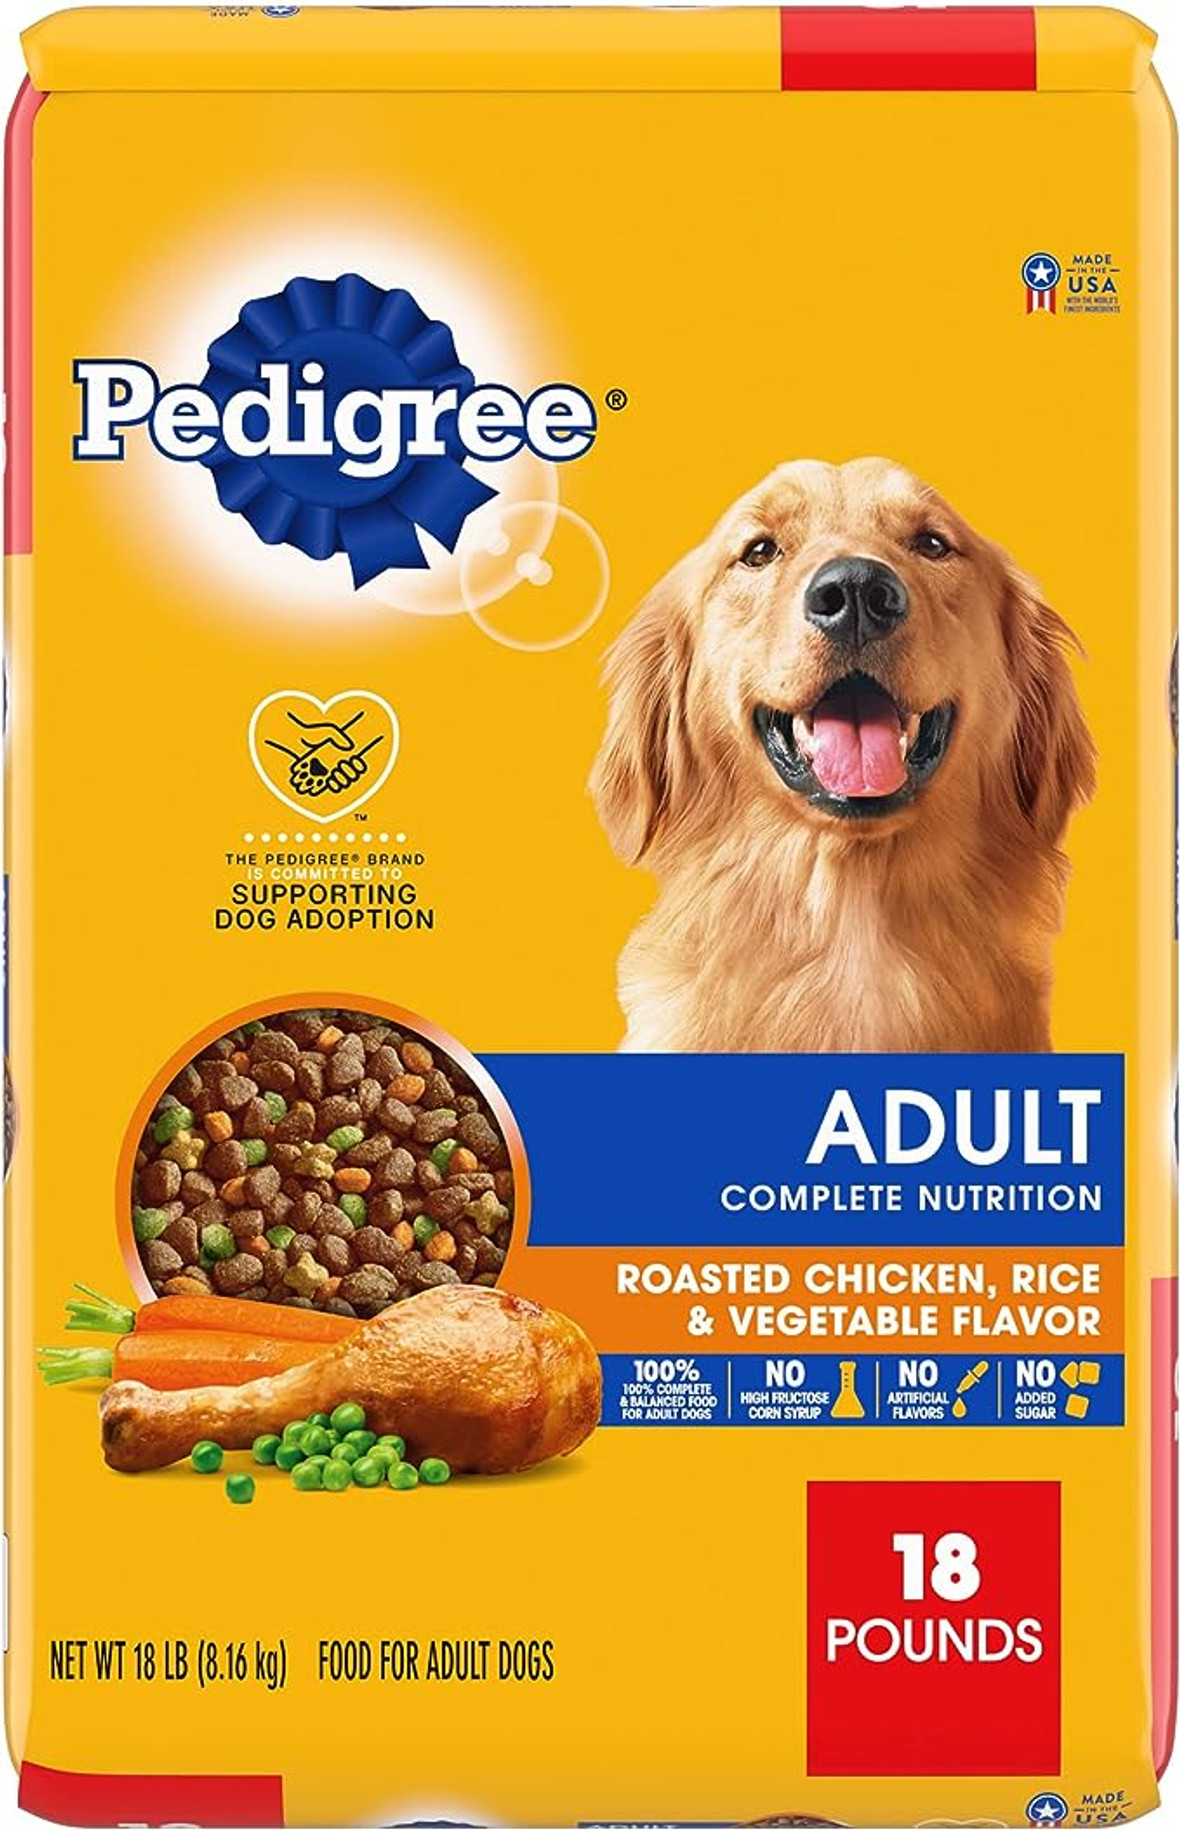 Pedigree Chicken and Vegetables Adult Dry Dog Food, 18 Pound